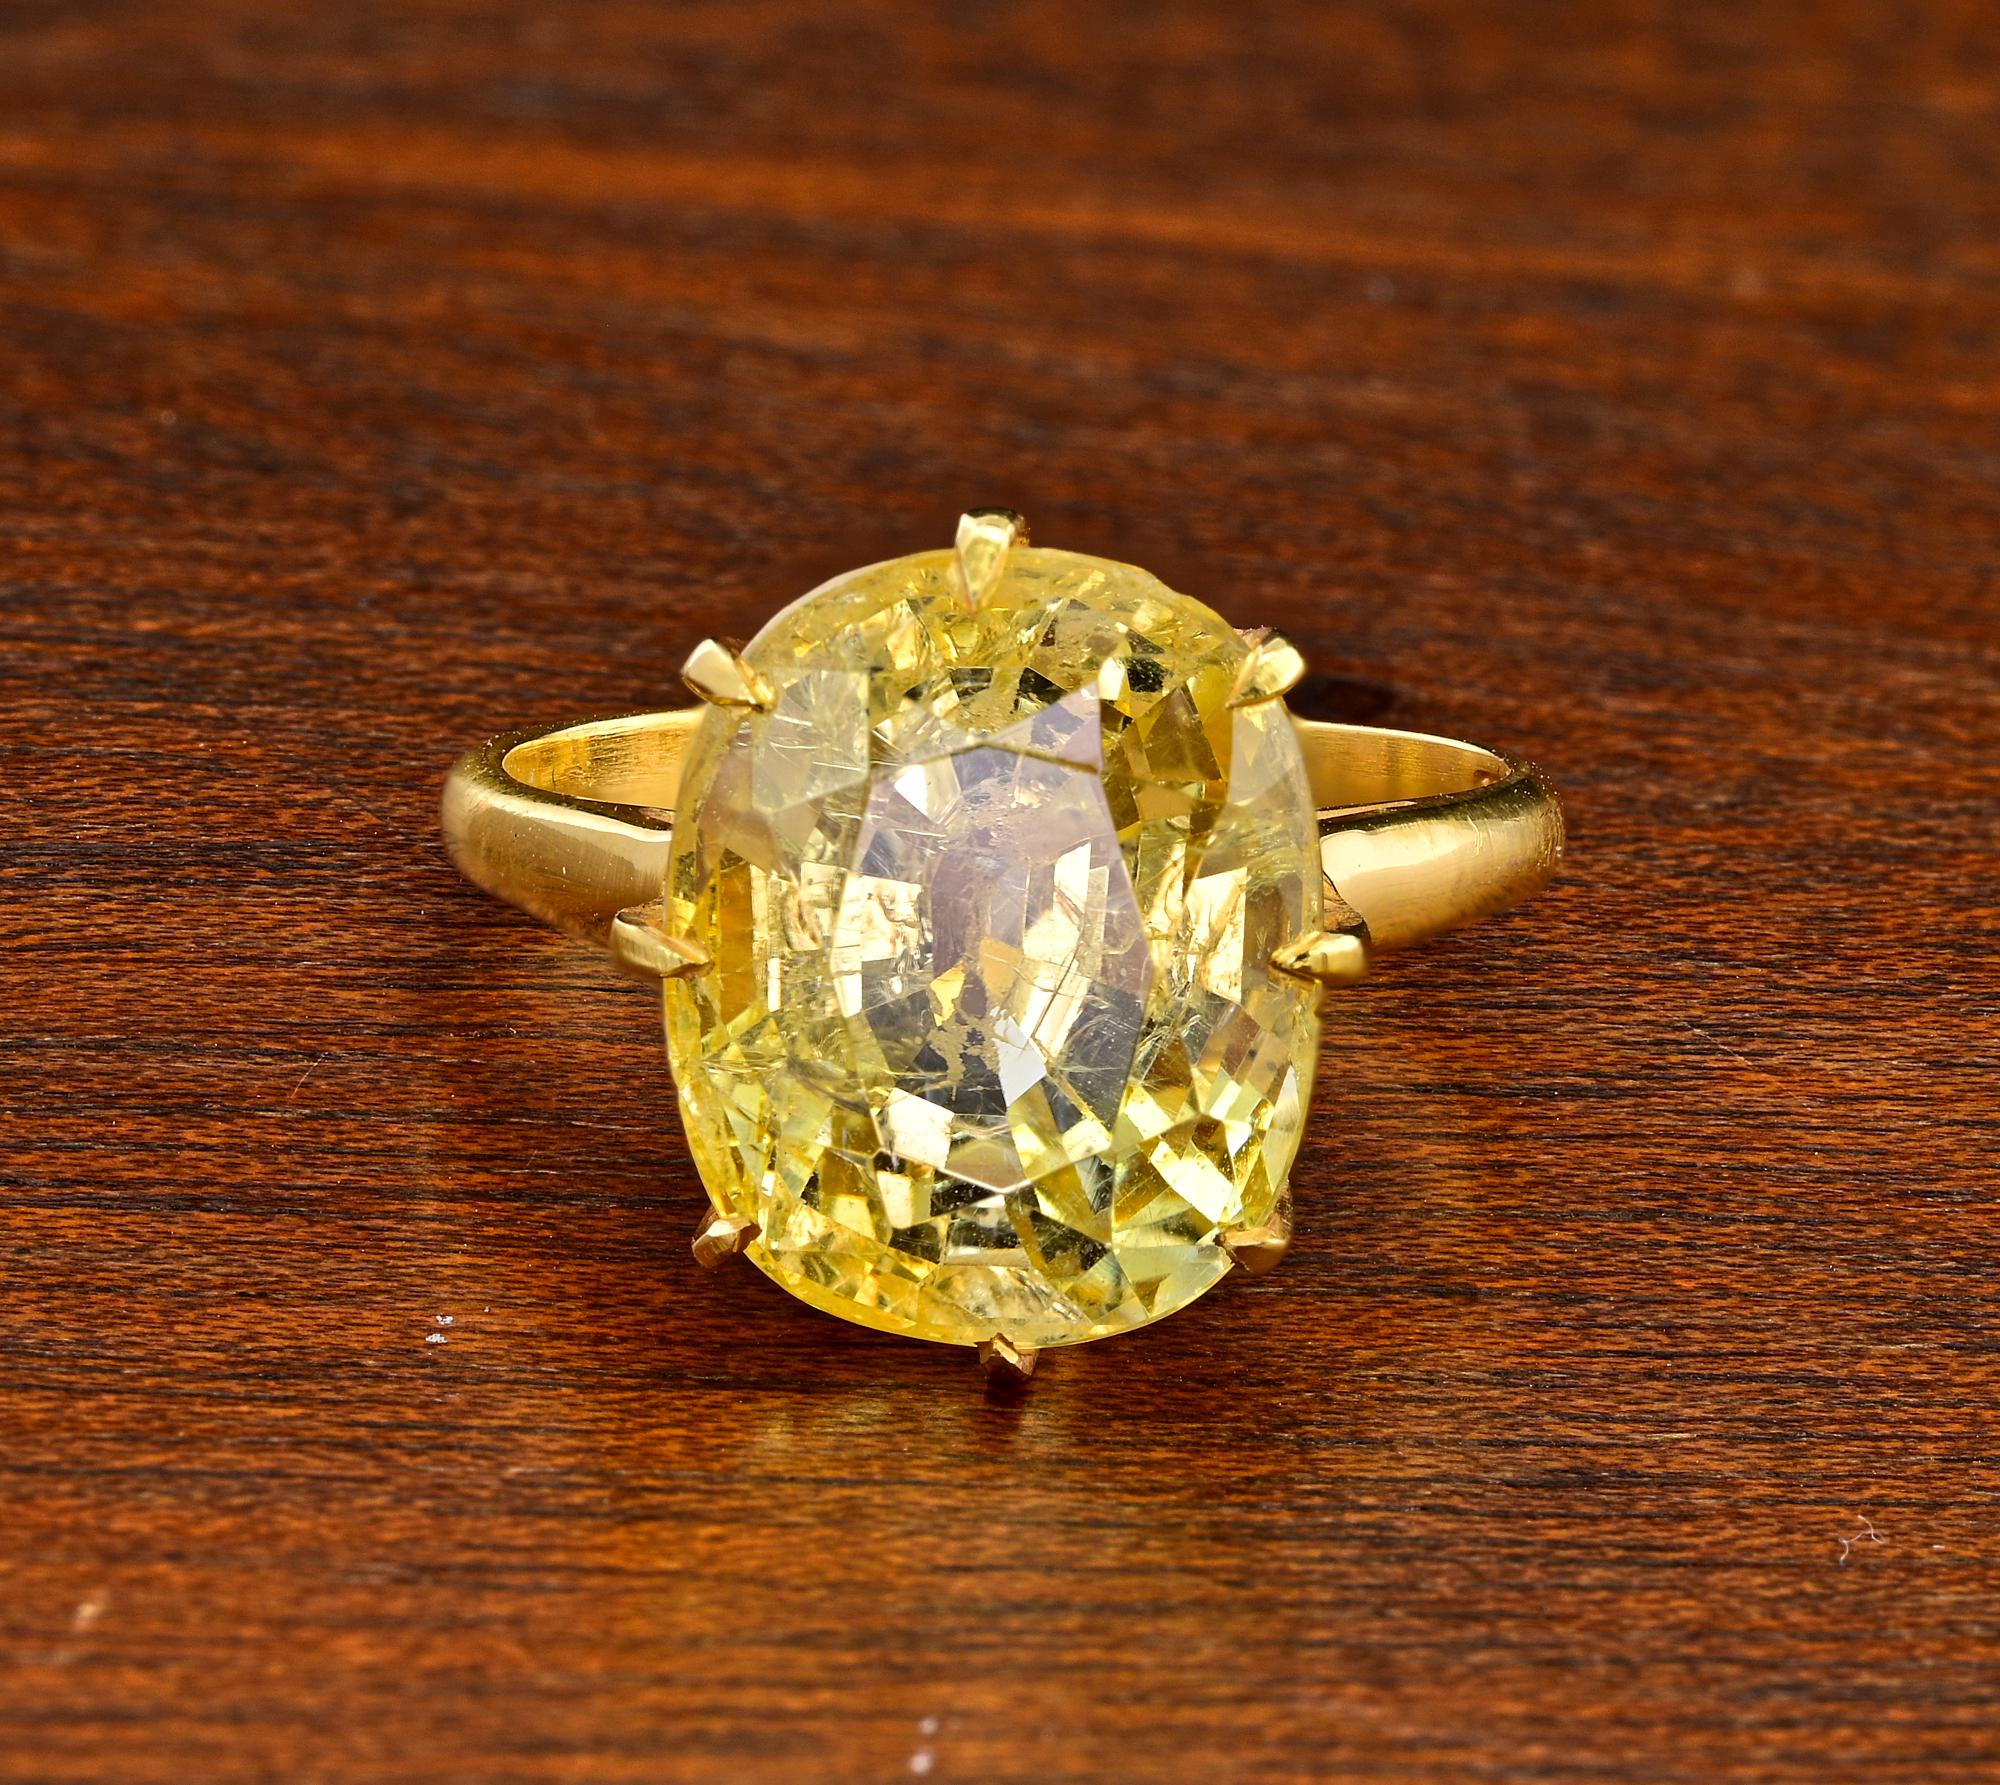 This breath taking Retro ring is 1940 circa
Appealing solitaire setting displaying the main stone in a lovely 18 Kt solid gold multi-claws mount
The focus of the ring is a stunning over size 11.00 Carats natural no heat Sapphire of gorgeous spring